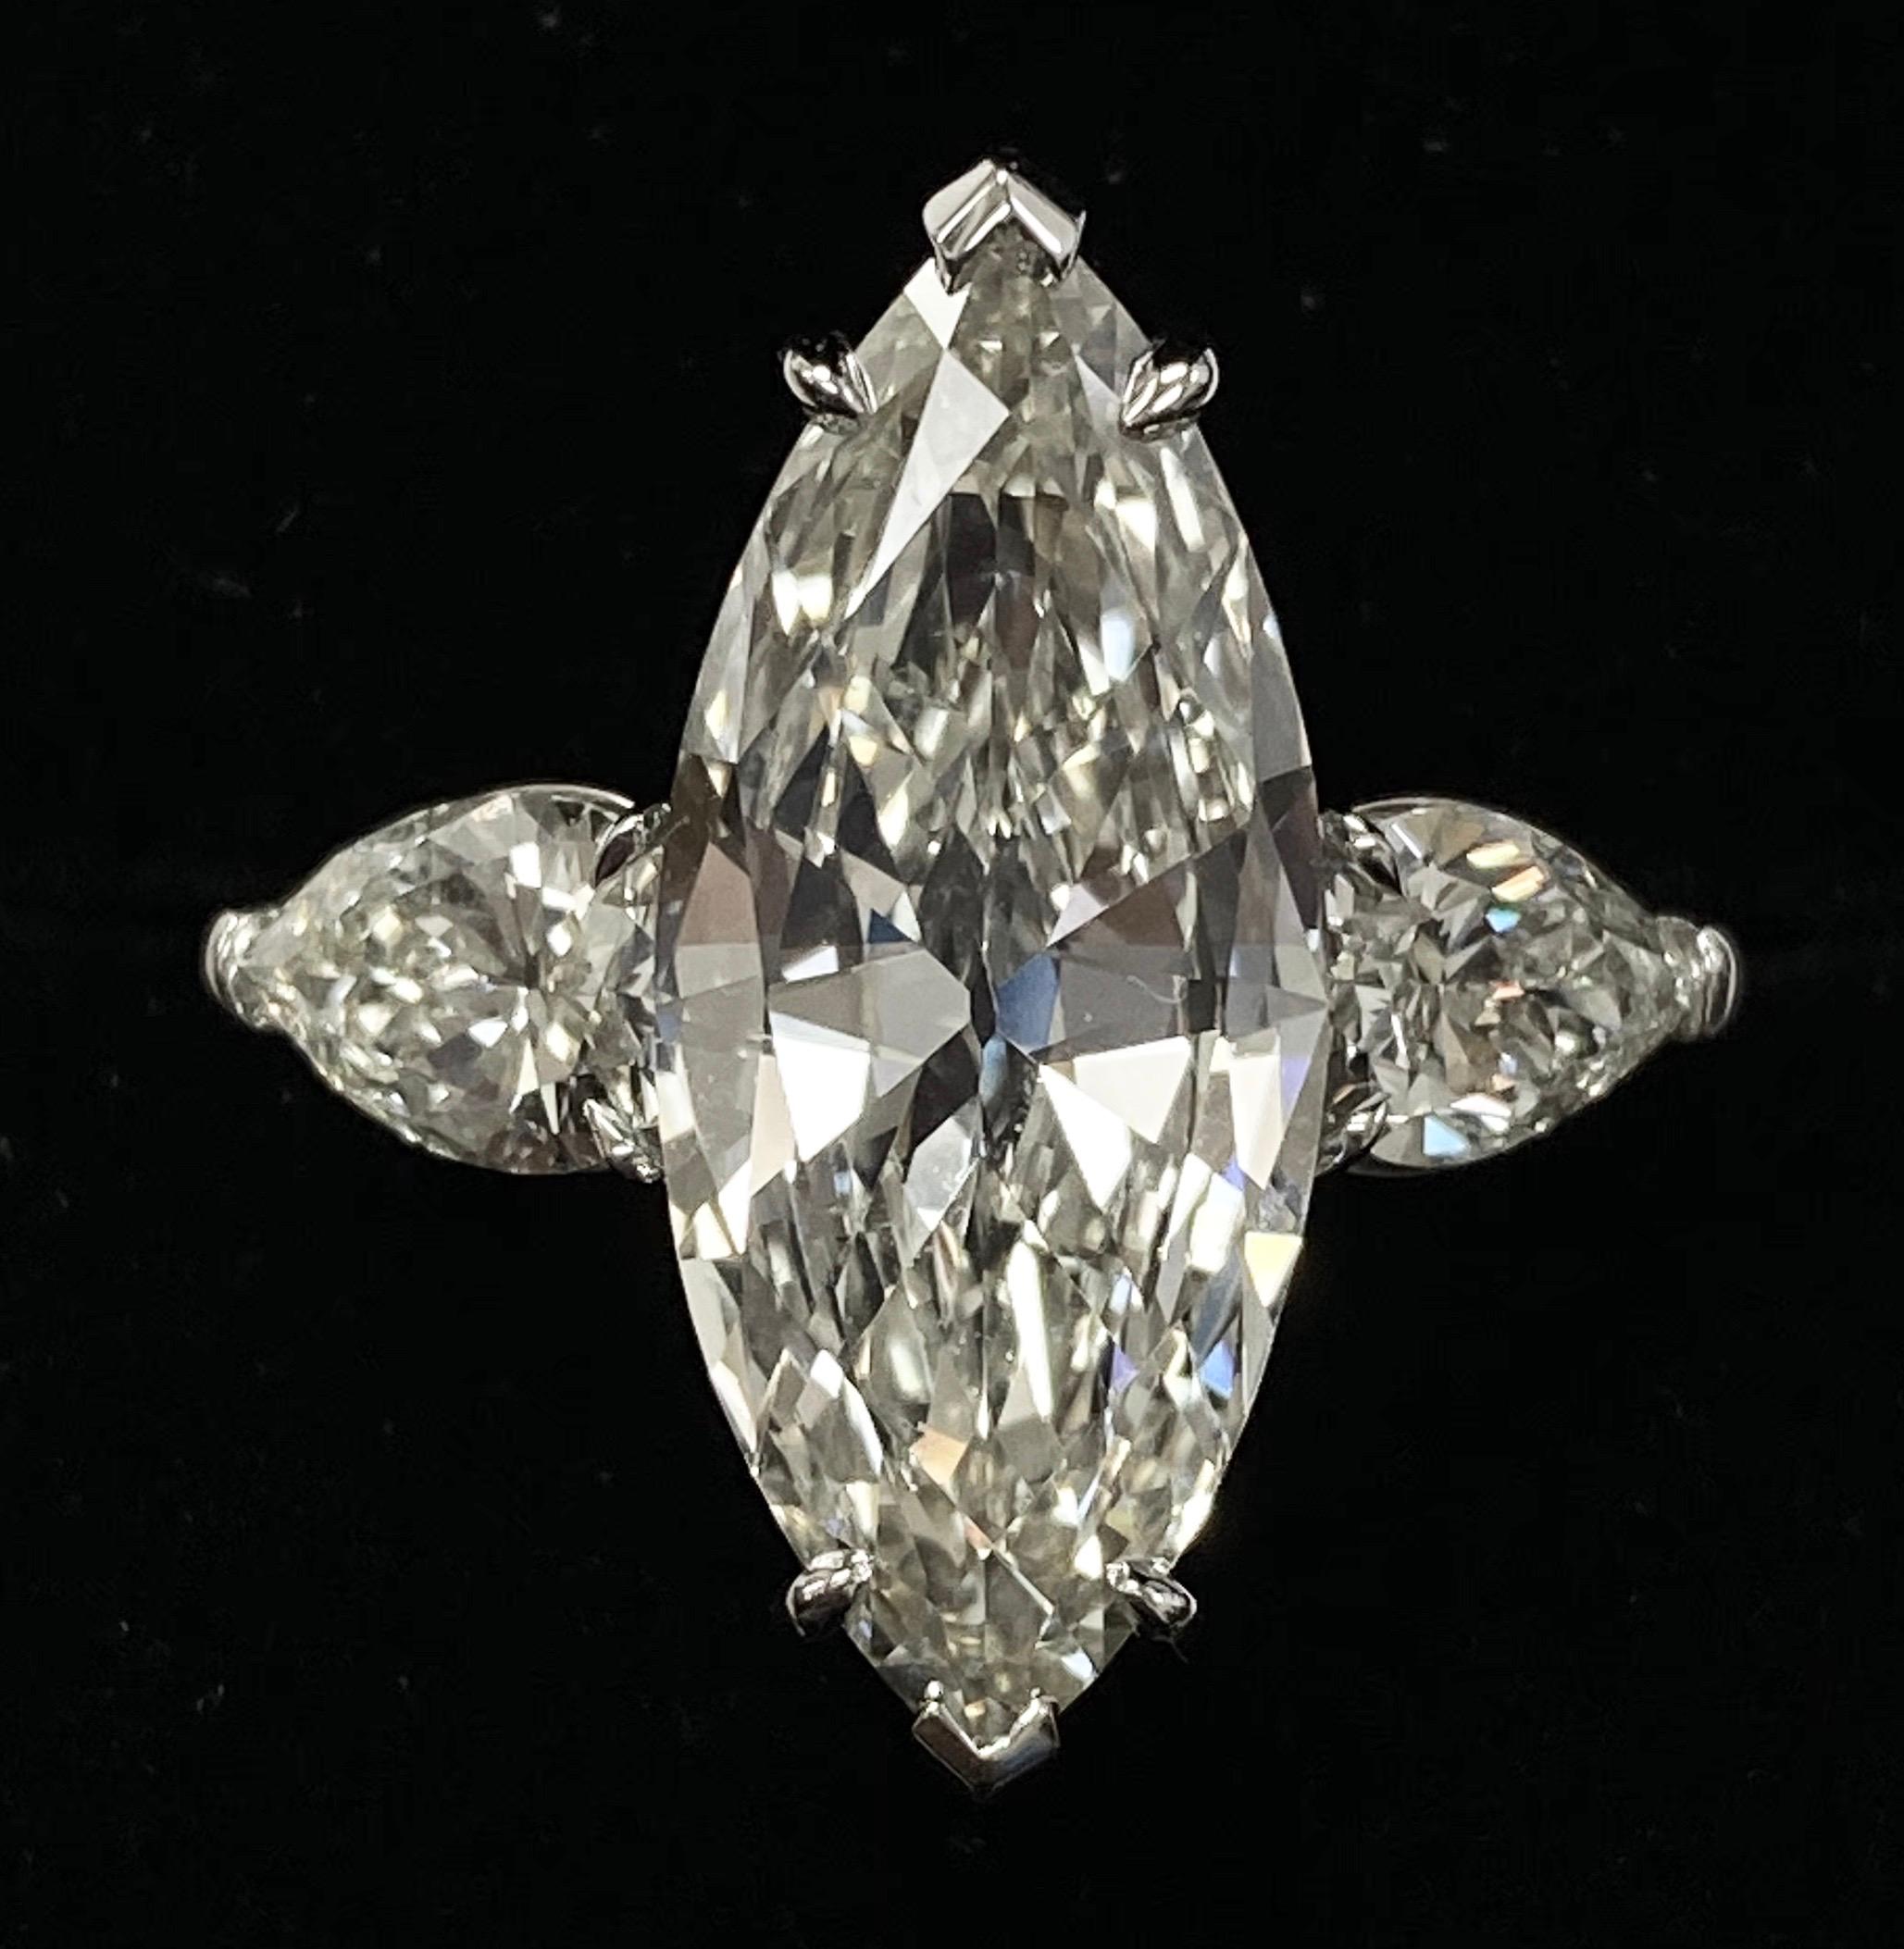 The rare size GIA Certified 4.61 carat marquise-cut diamond is perfectly accentuated with another two beautifully pear shape diamonds mounted on both sides of the 18K gold ring respectively. This stylish three-stone ring features big, bold and